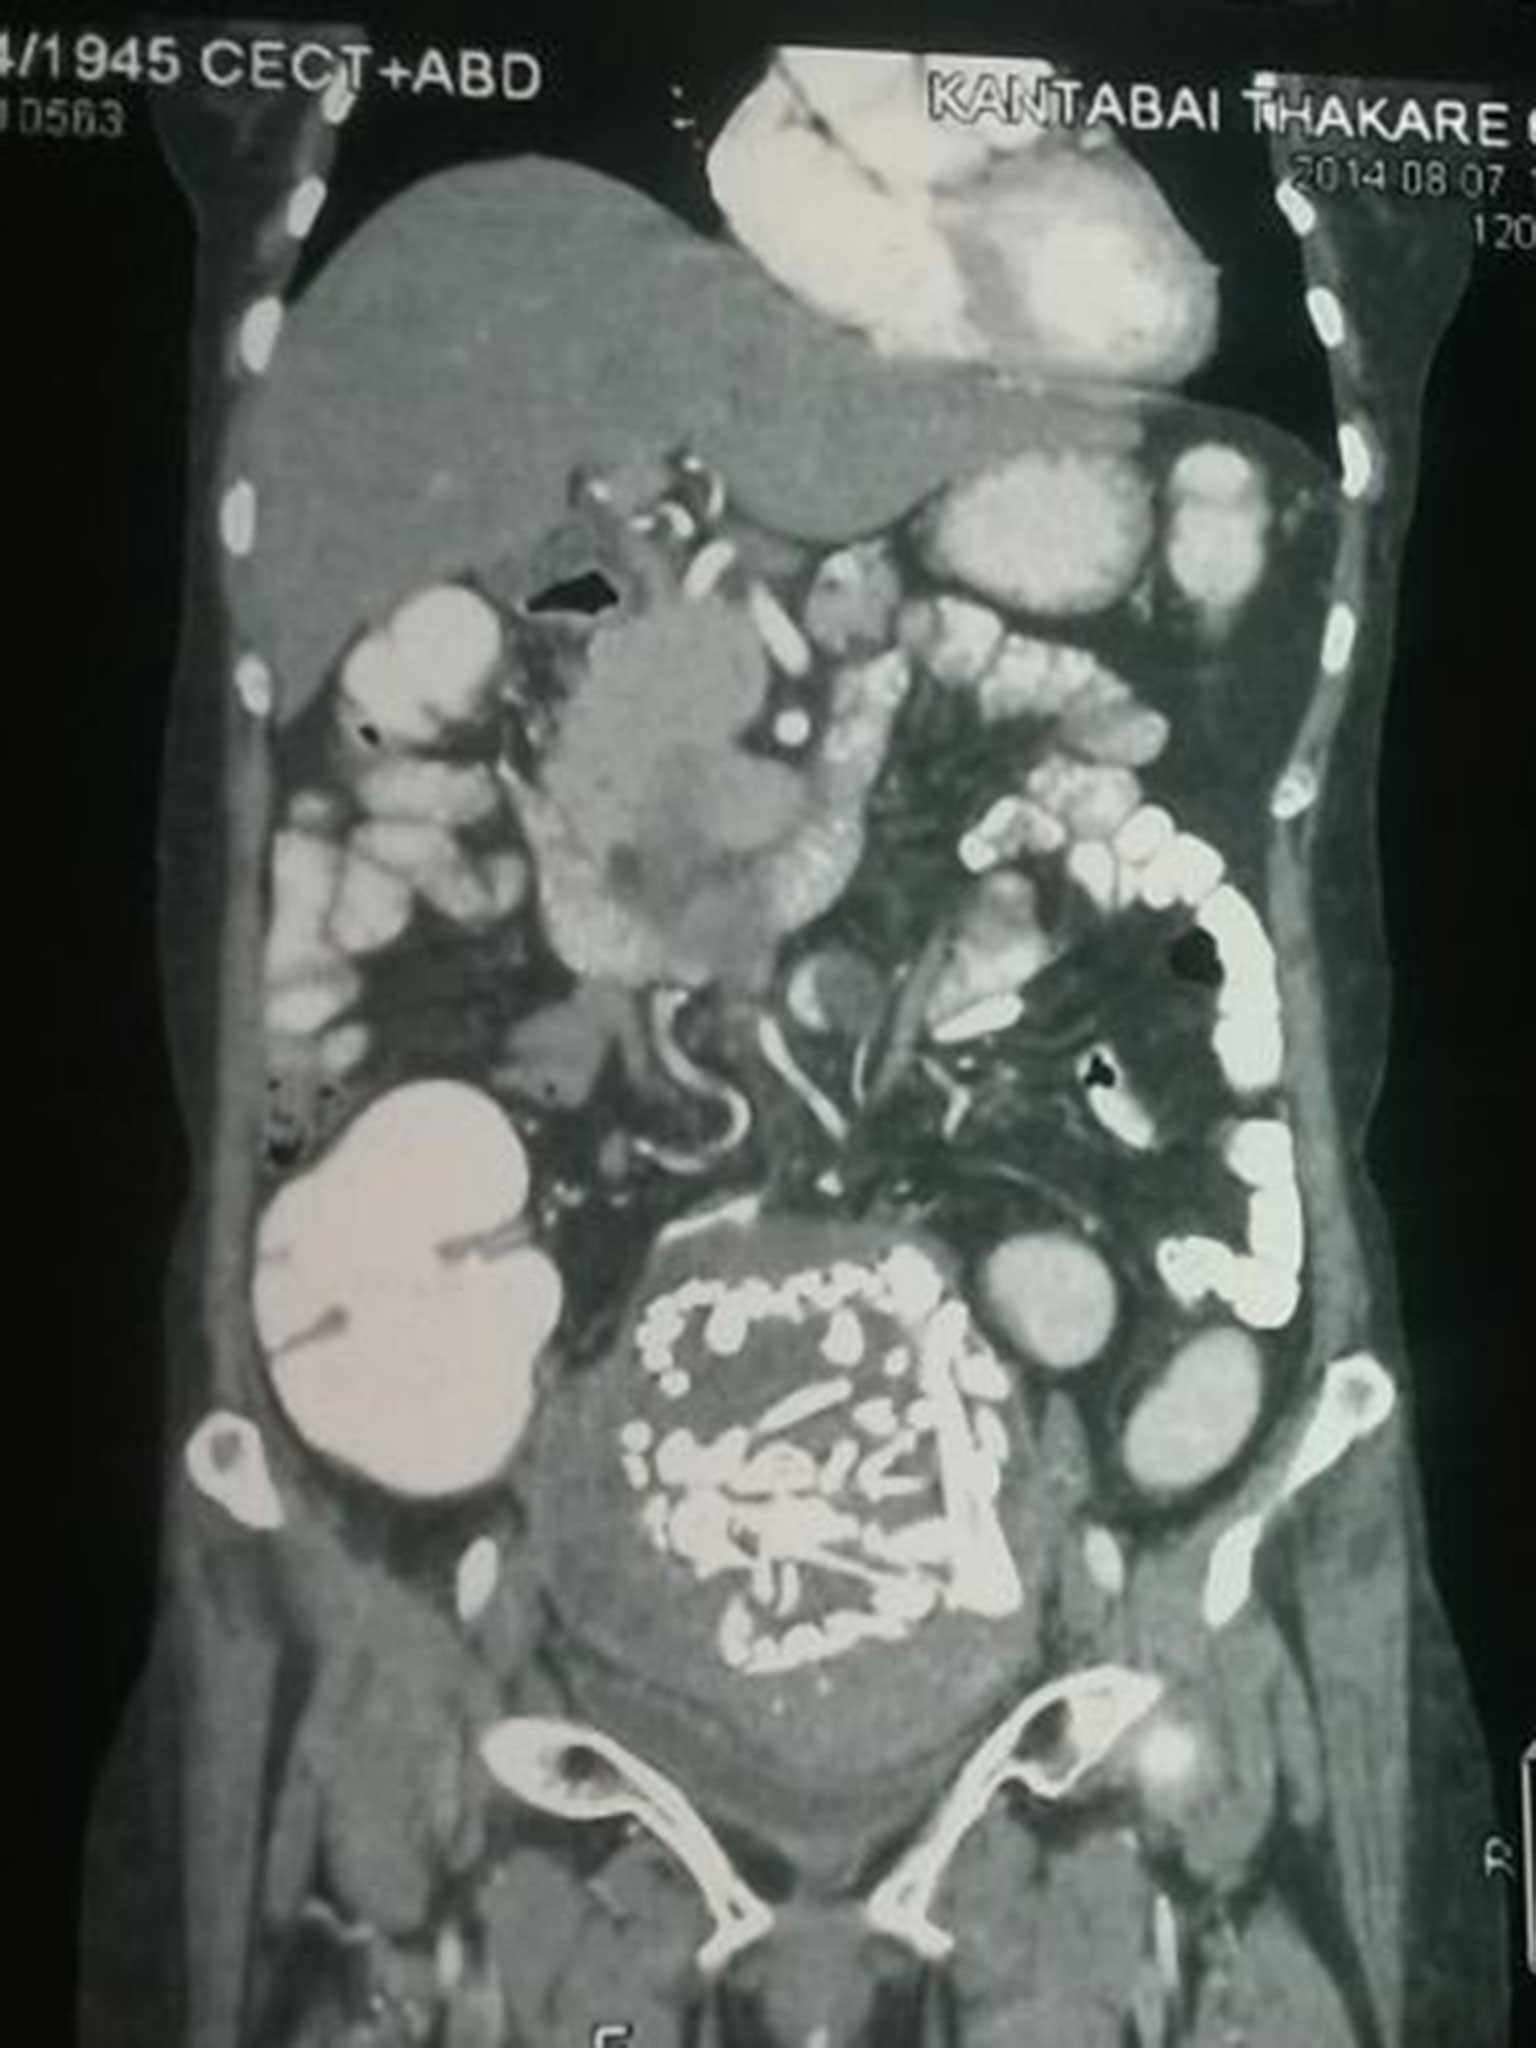 The CT scan of the mass containing the bones of a dead foetus